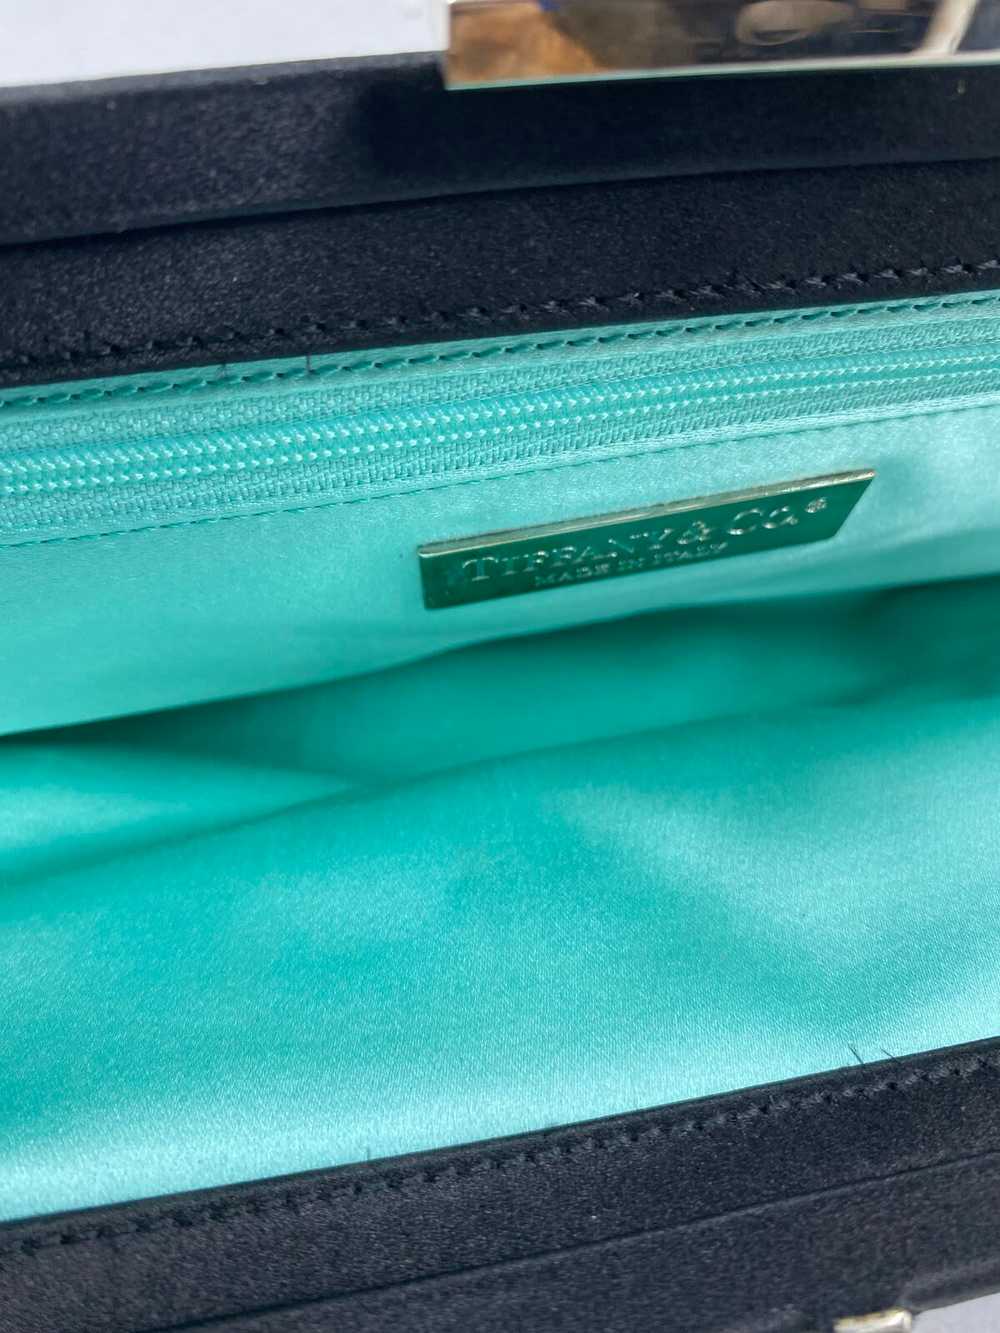 Authentic Tiffany & Co. Satin Clutch - image 5